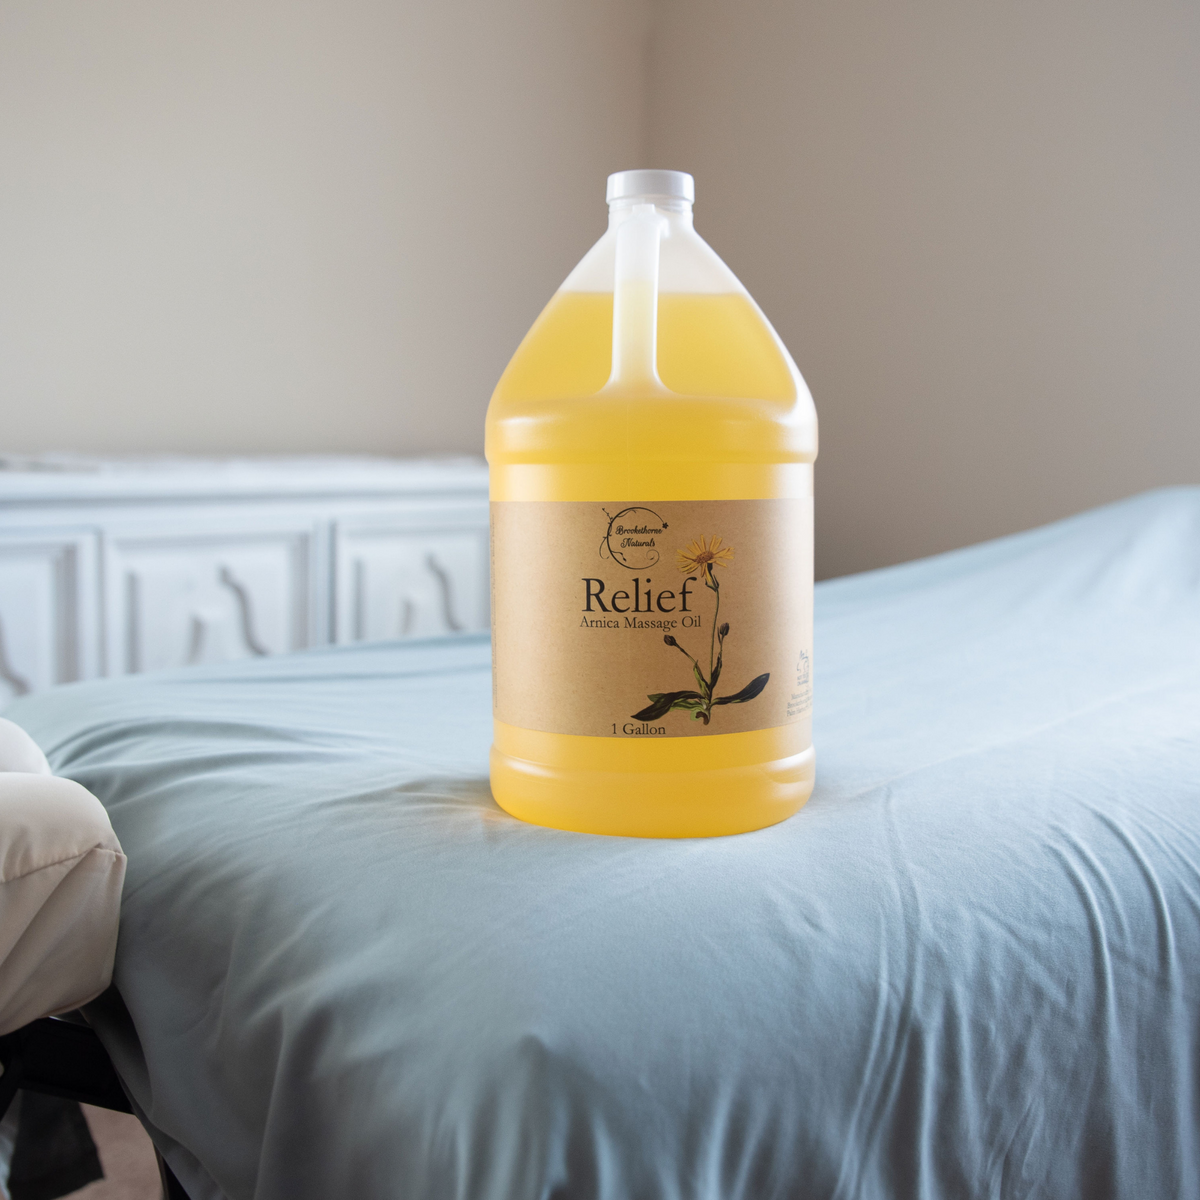 Relief Arnica Massage Oil Gallon Jug sitting on a massage table